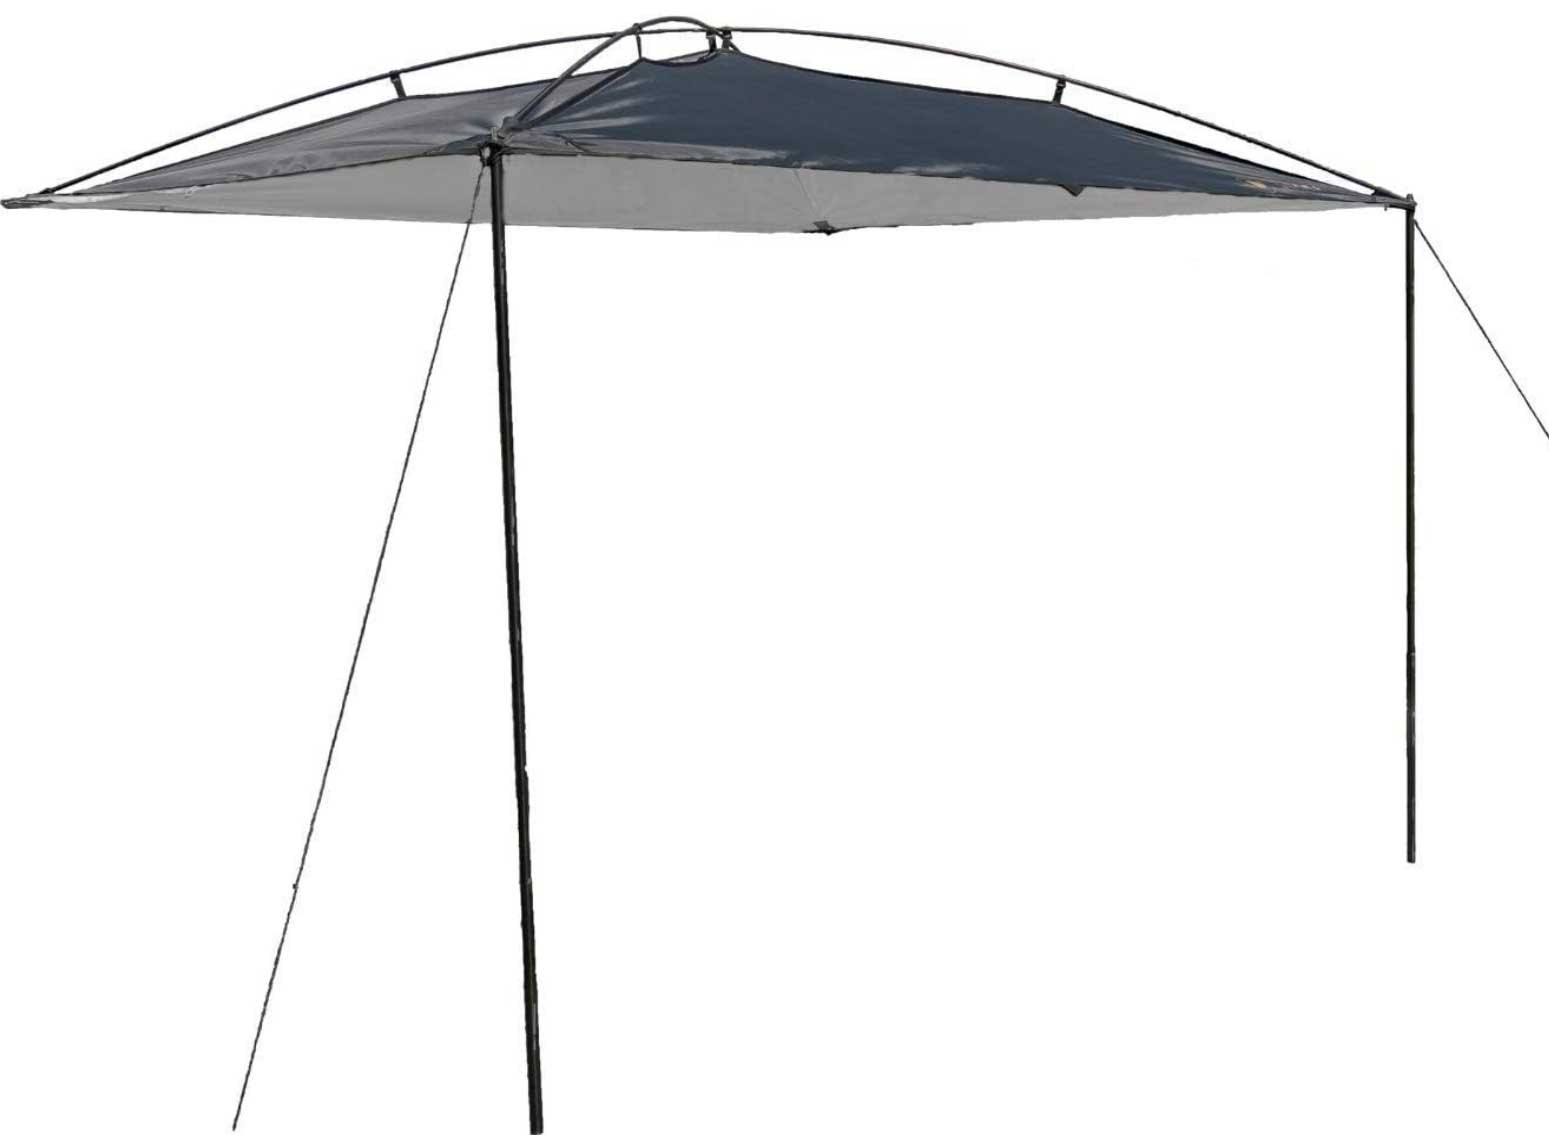 Moonshade Awning Review By Steph